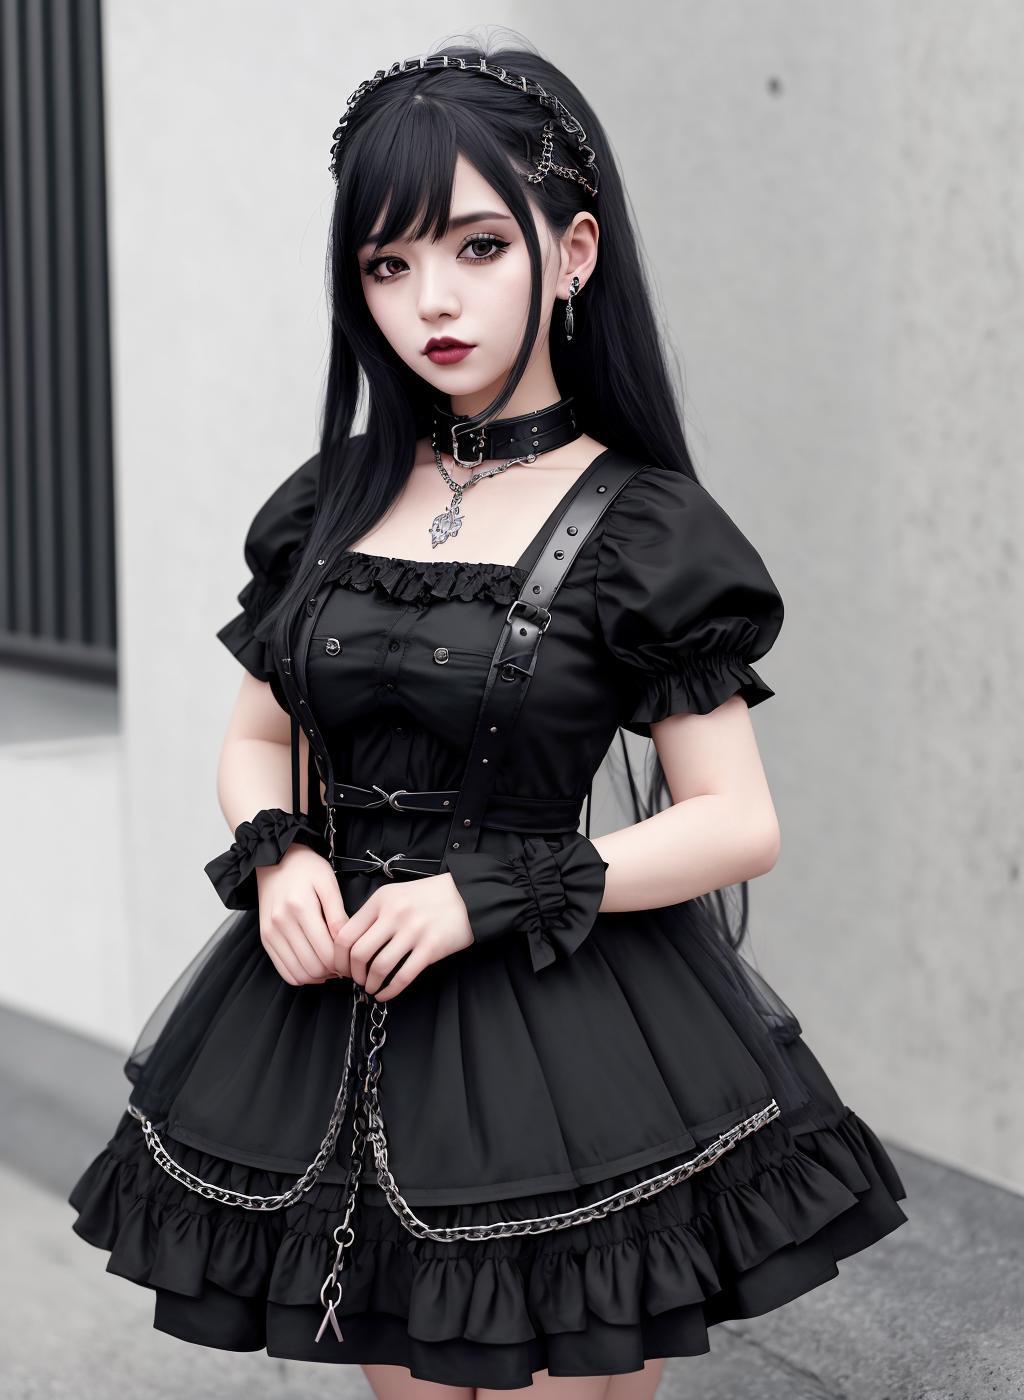 Goth Gals image by EDG